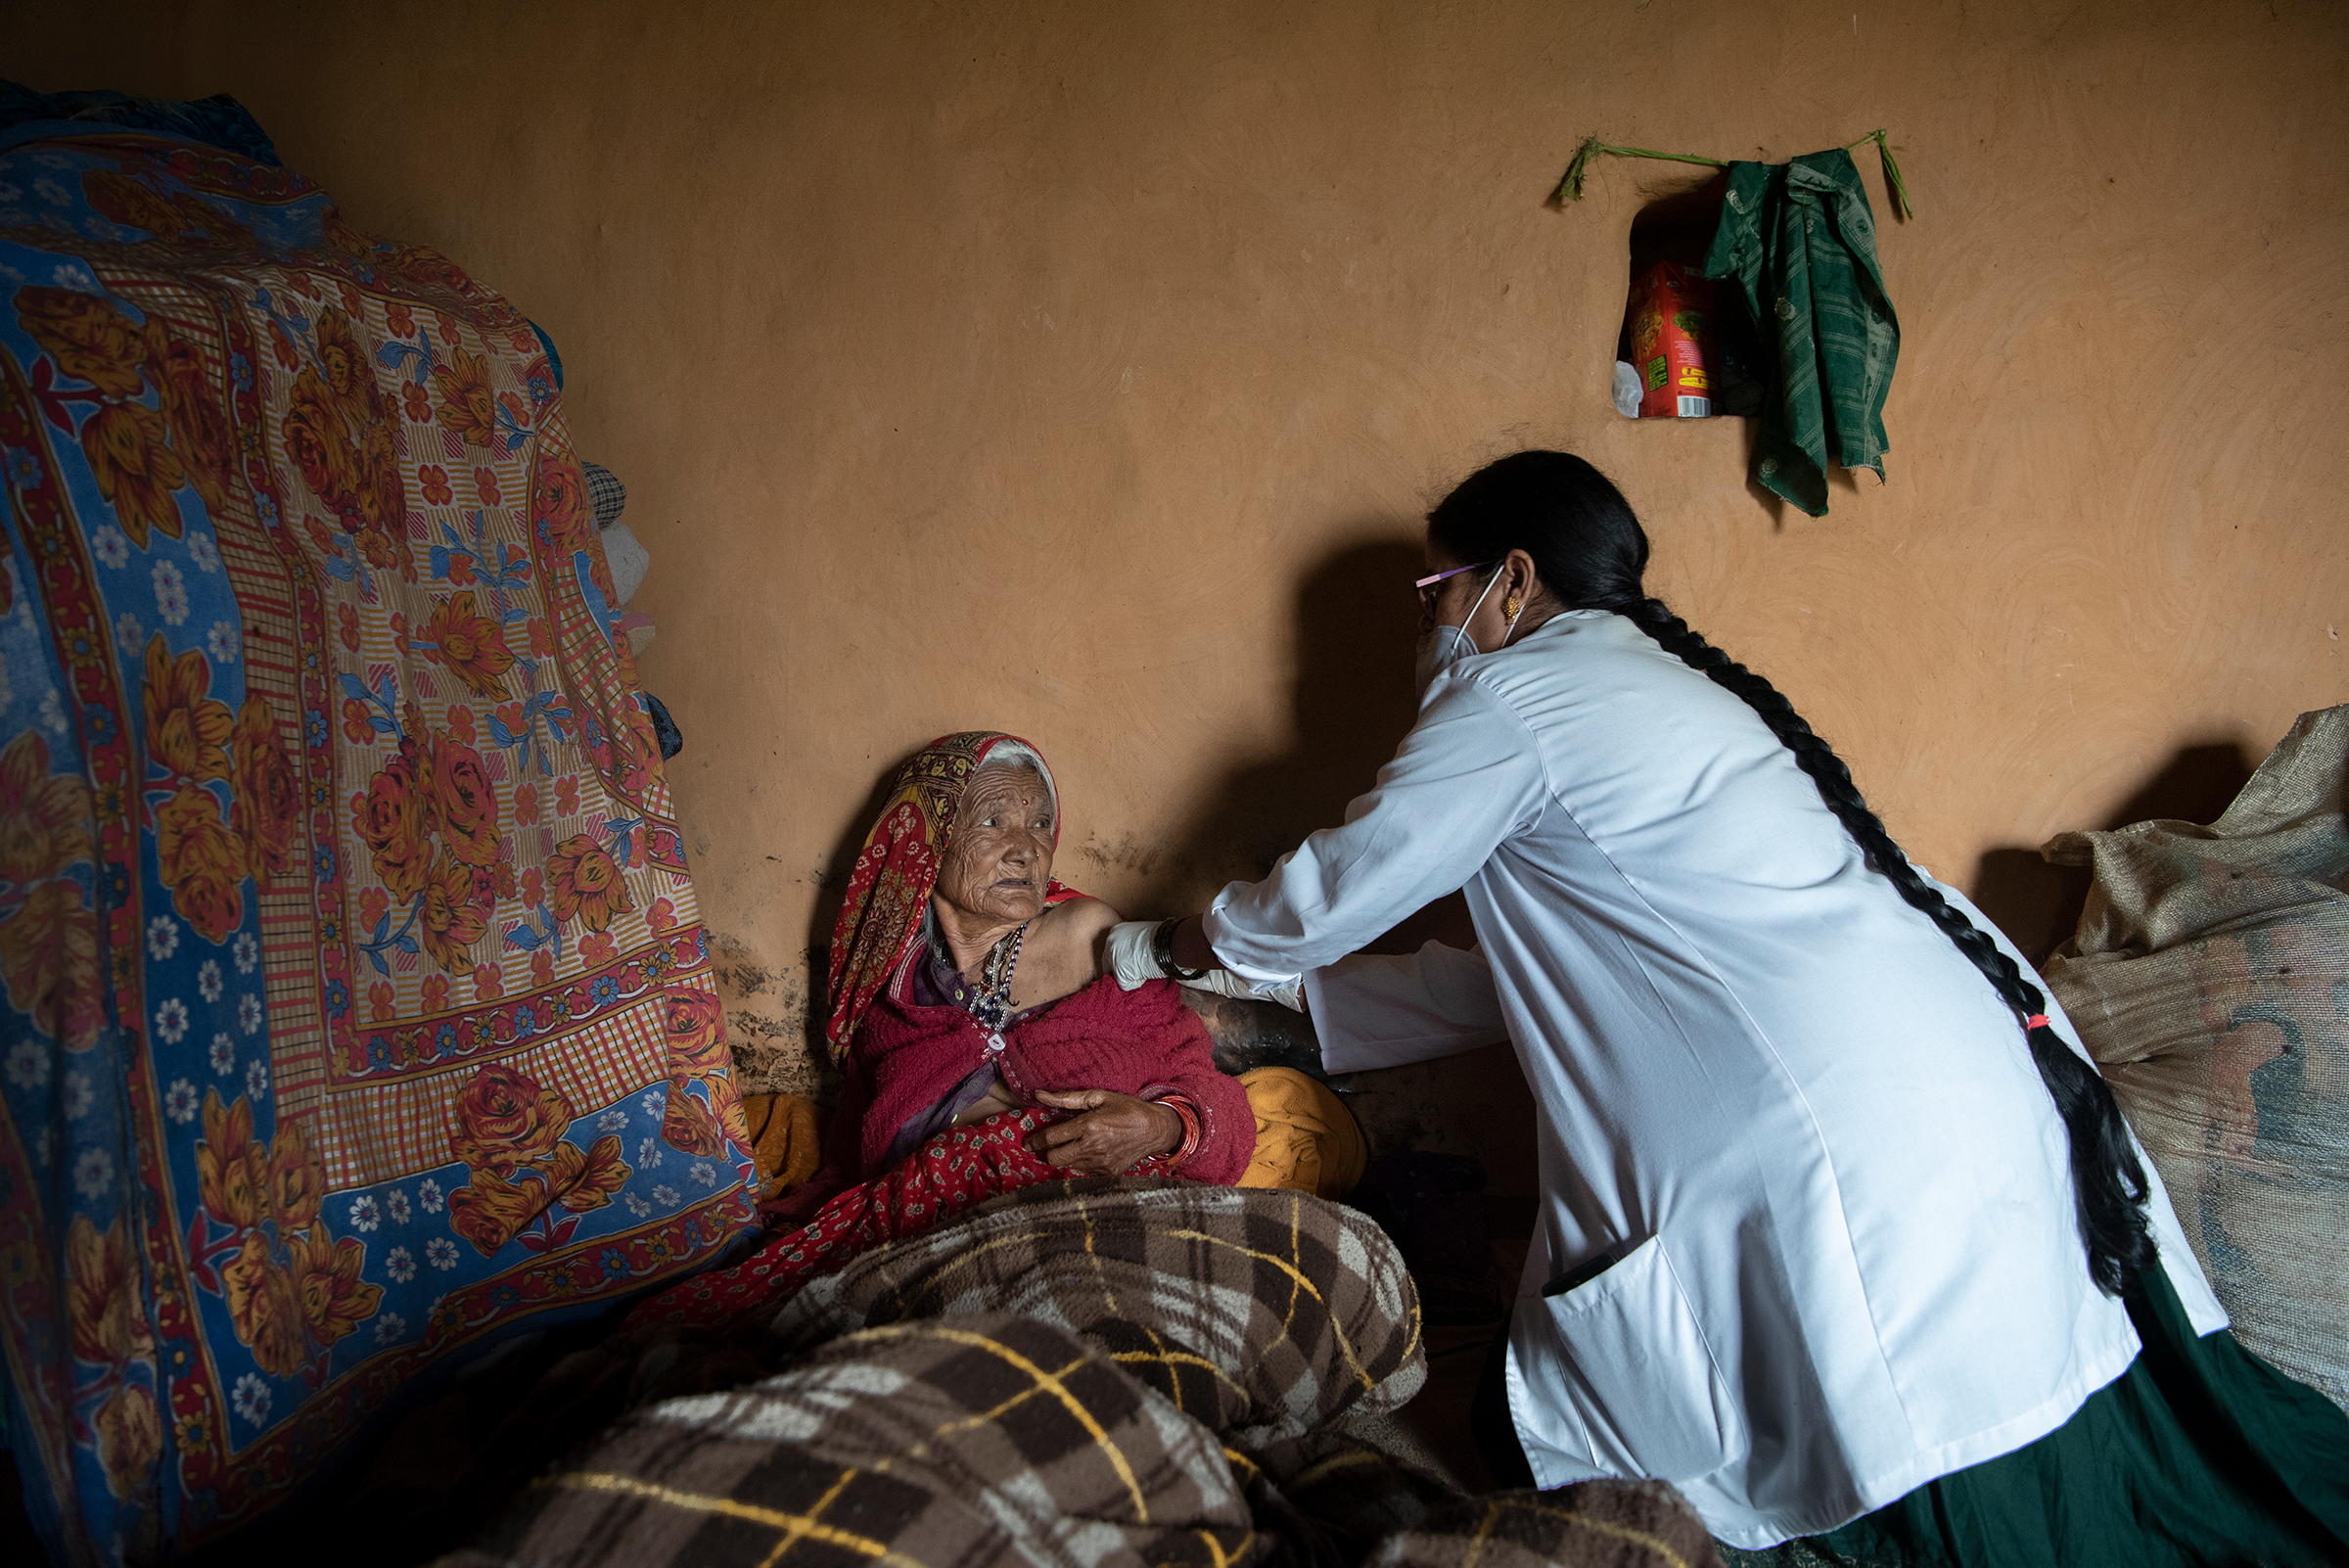 Gokuli Devi, 80, receives a vaccine at her home near Aghariya, India, on Sept. 4 because she is too frail to walk to a local COVID-19 vaccination site. (Saumya Khandelwal for TIME)